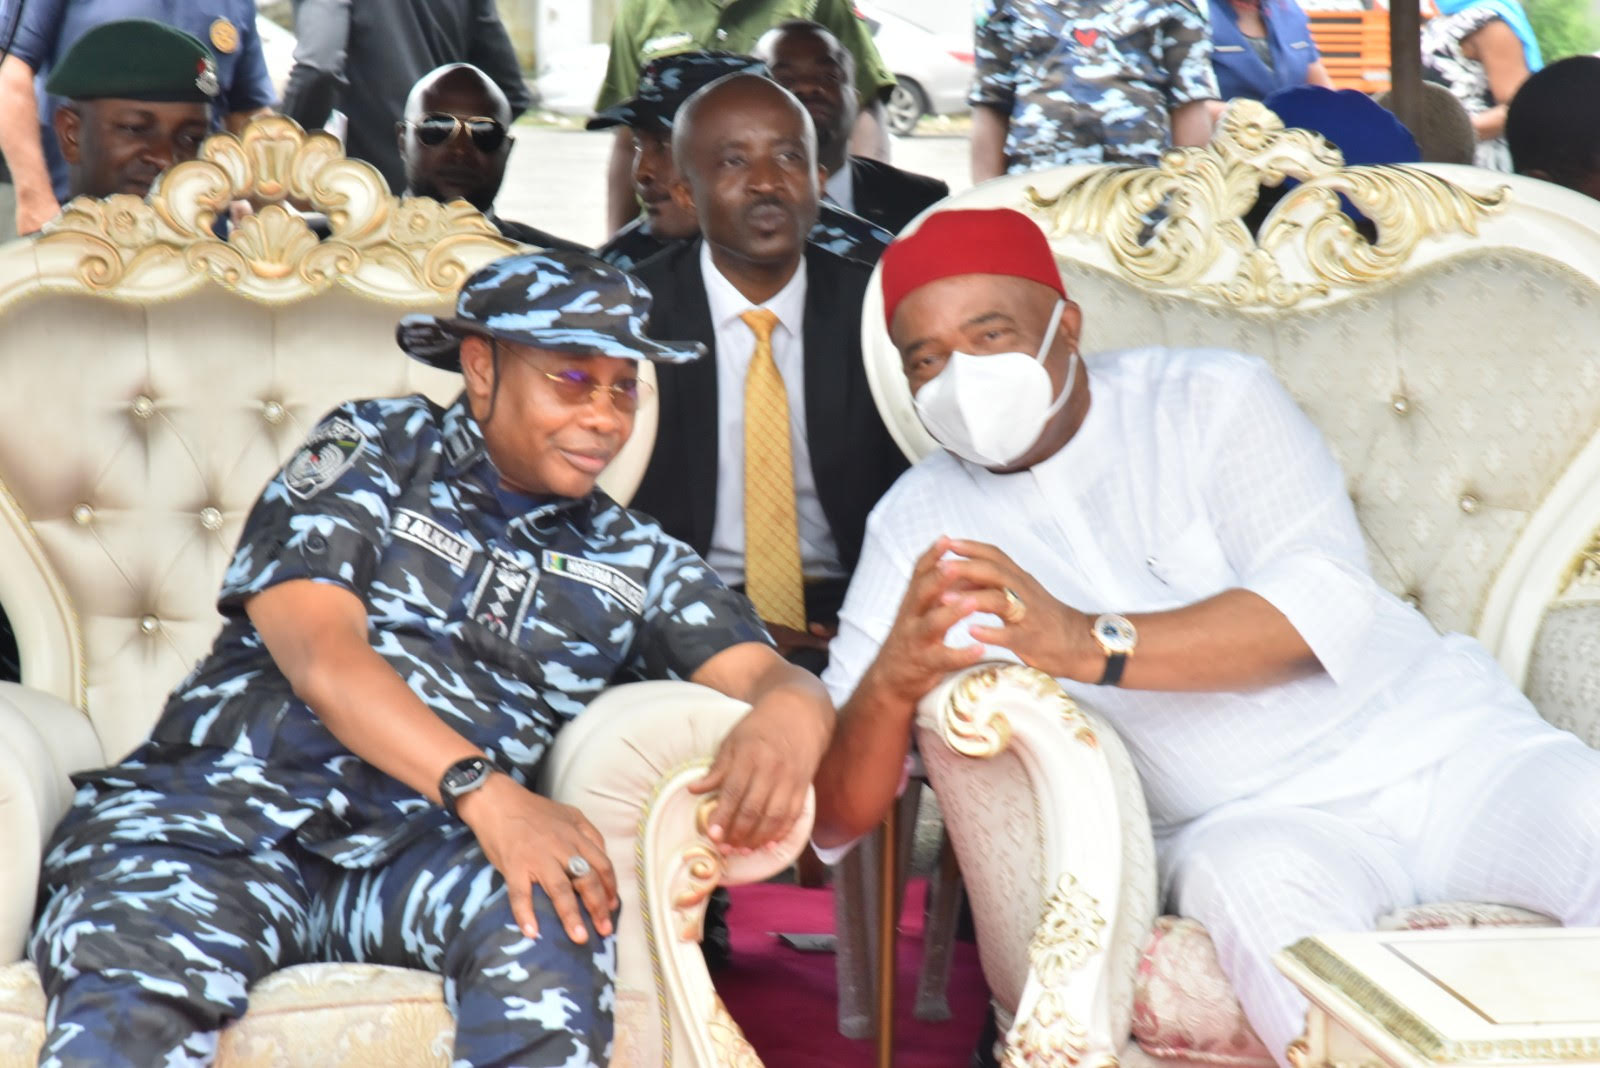 IG of Police, Usman Baba Alkali with Governor Hope Uzodimma and others as he cuts the tape to Commission 10 APC Security Vehicles and other Gadgets donated by the Governor to the Nigerian Police in Owerri...Tuesday.